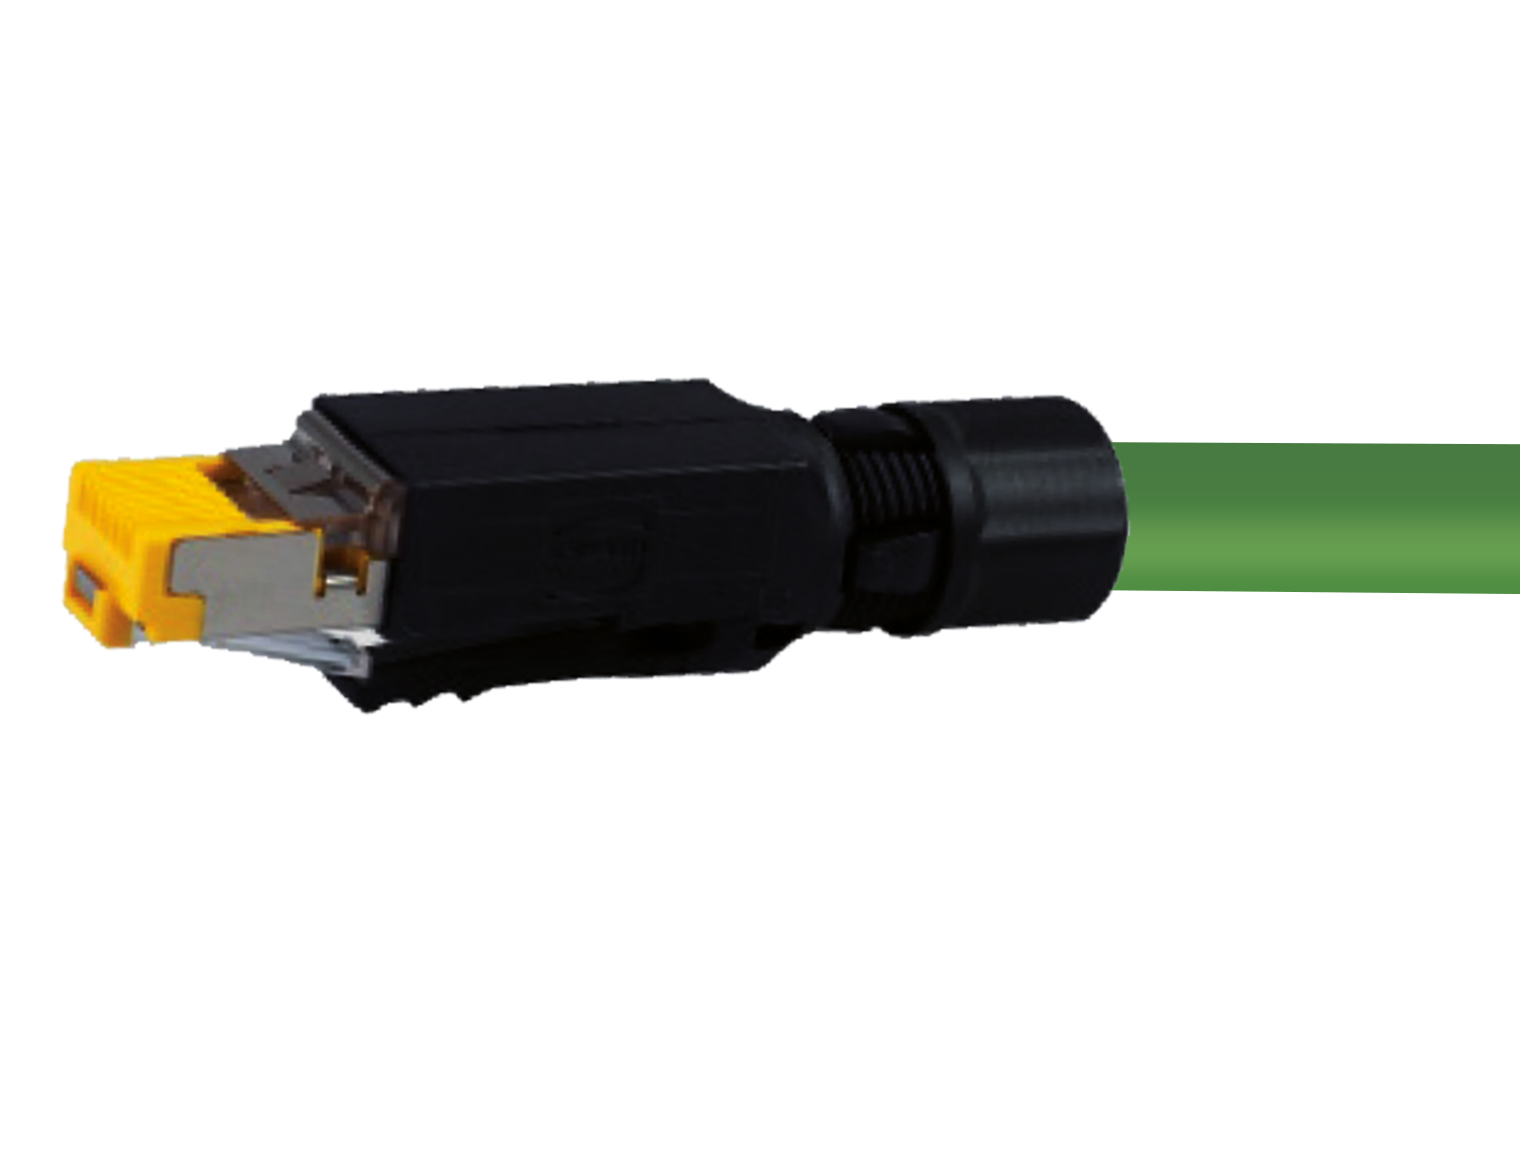 HELUKAT-CONNECTING-SYSTEMS-INDUSTRY-HELUKAT500S-SF-FTP-Kat-6A-RJ45-180-M806582